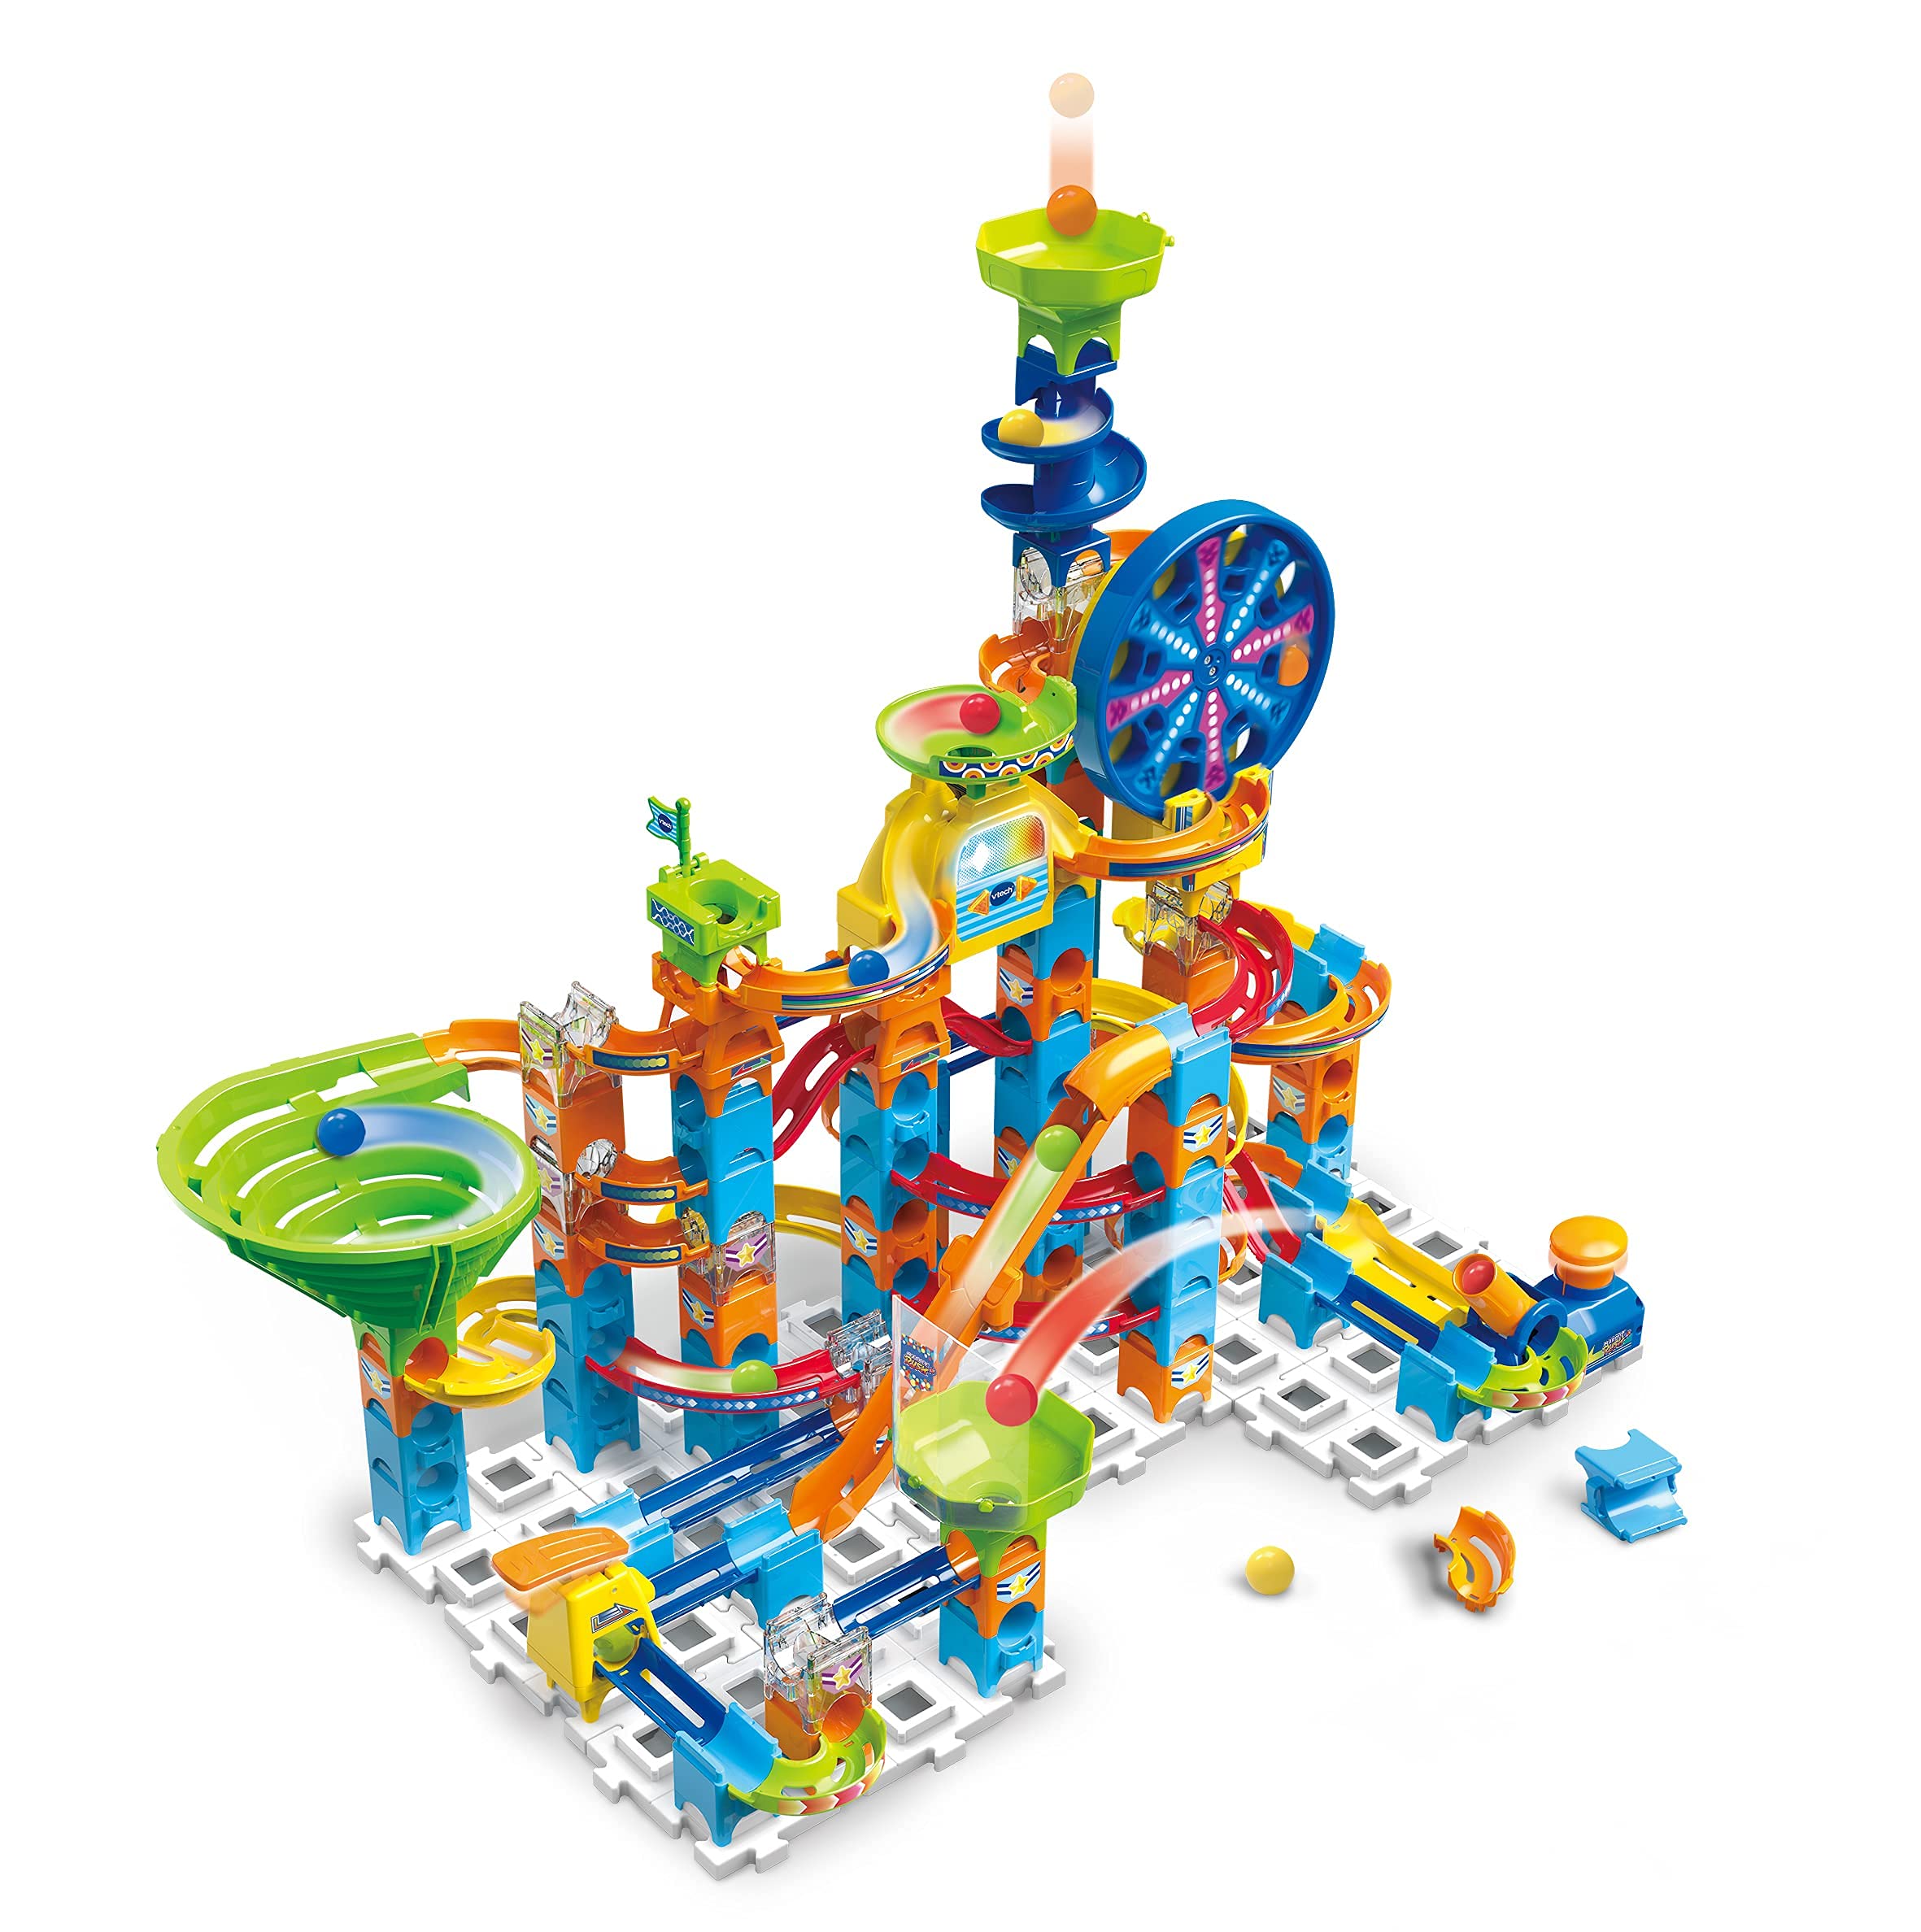 VTech Marble Rush Adventure Set Construction Toys for Kids with 10 Marbles and 128 Building Pieces Electronic Track Set for